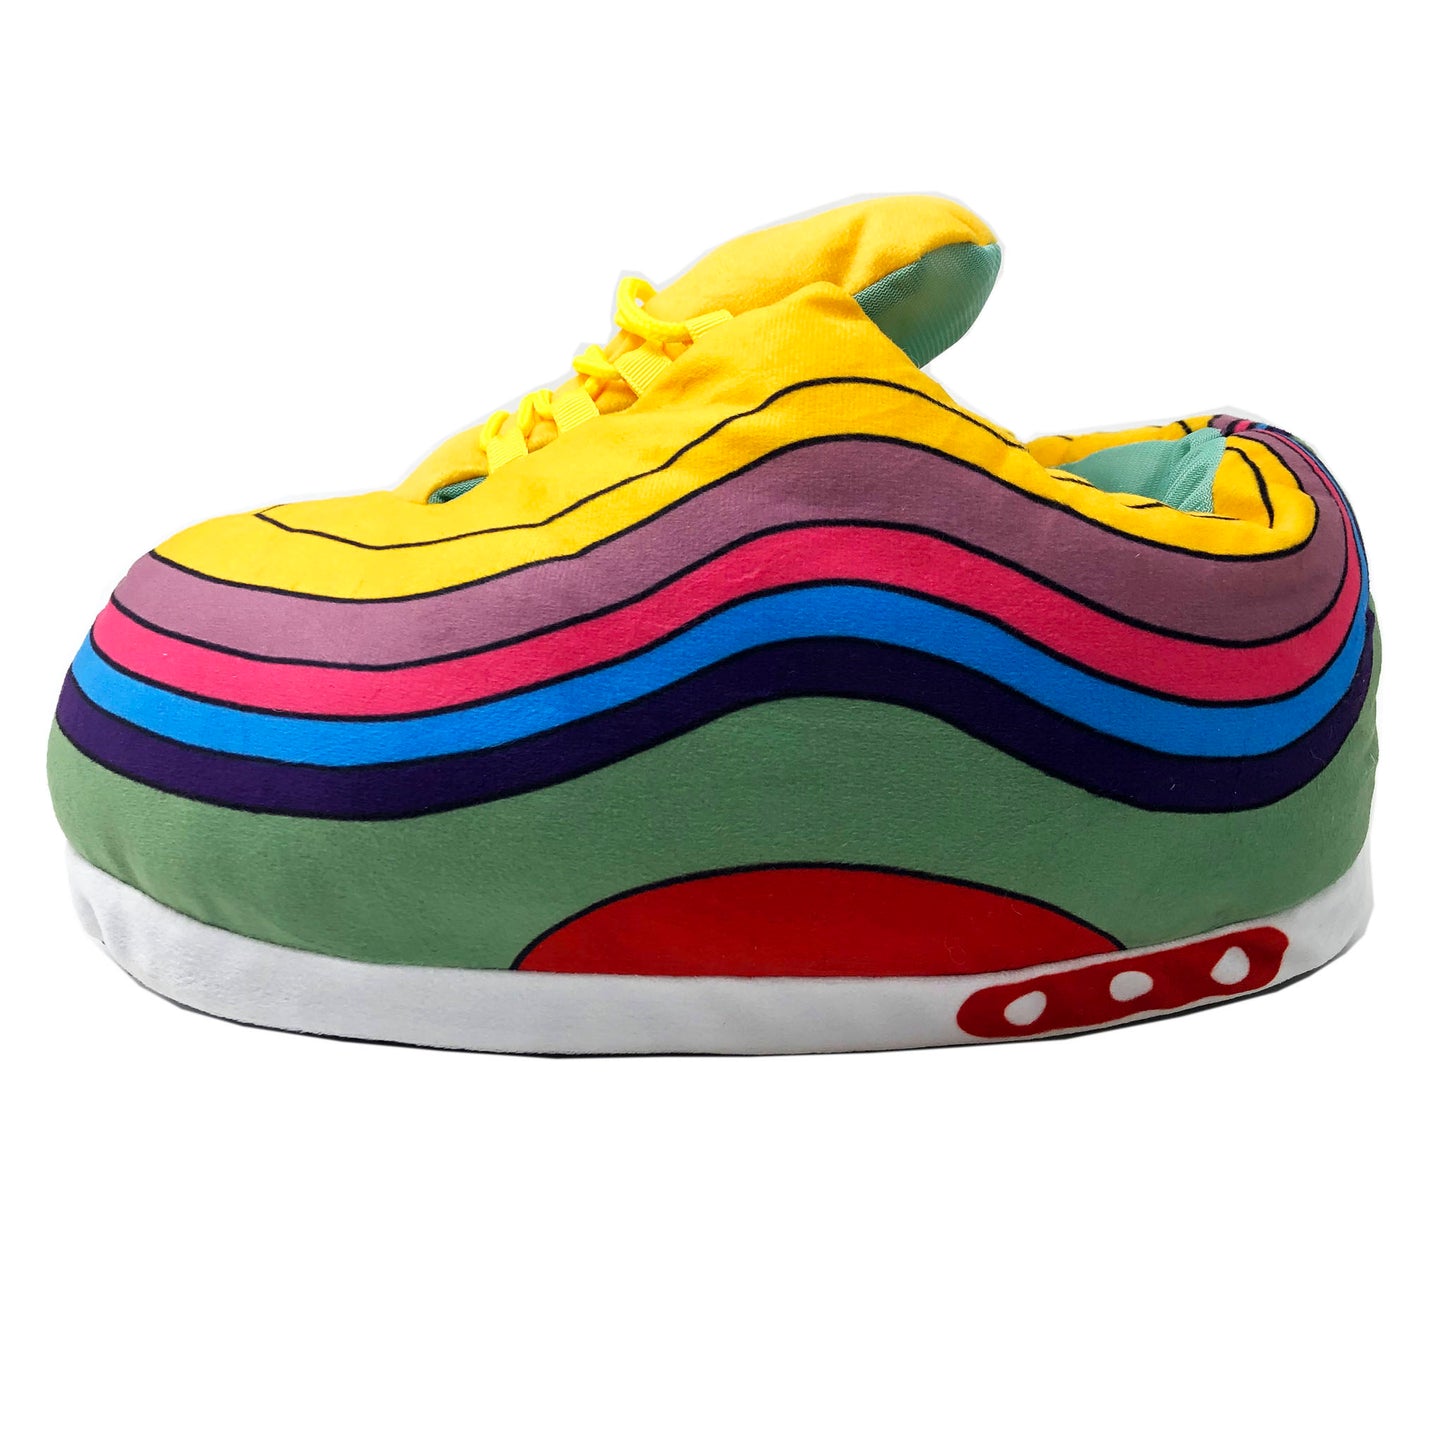 Sean Wotherspoon 97